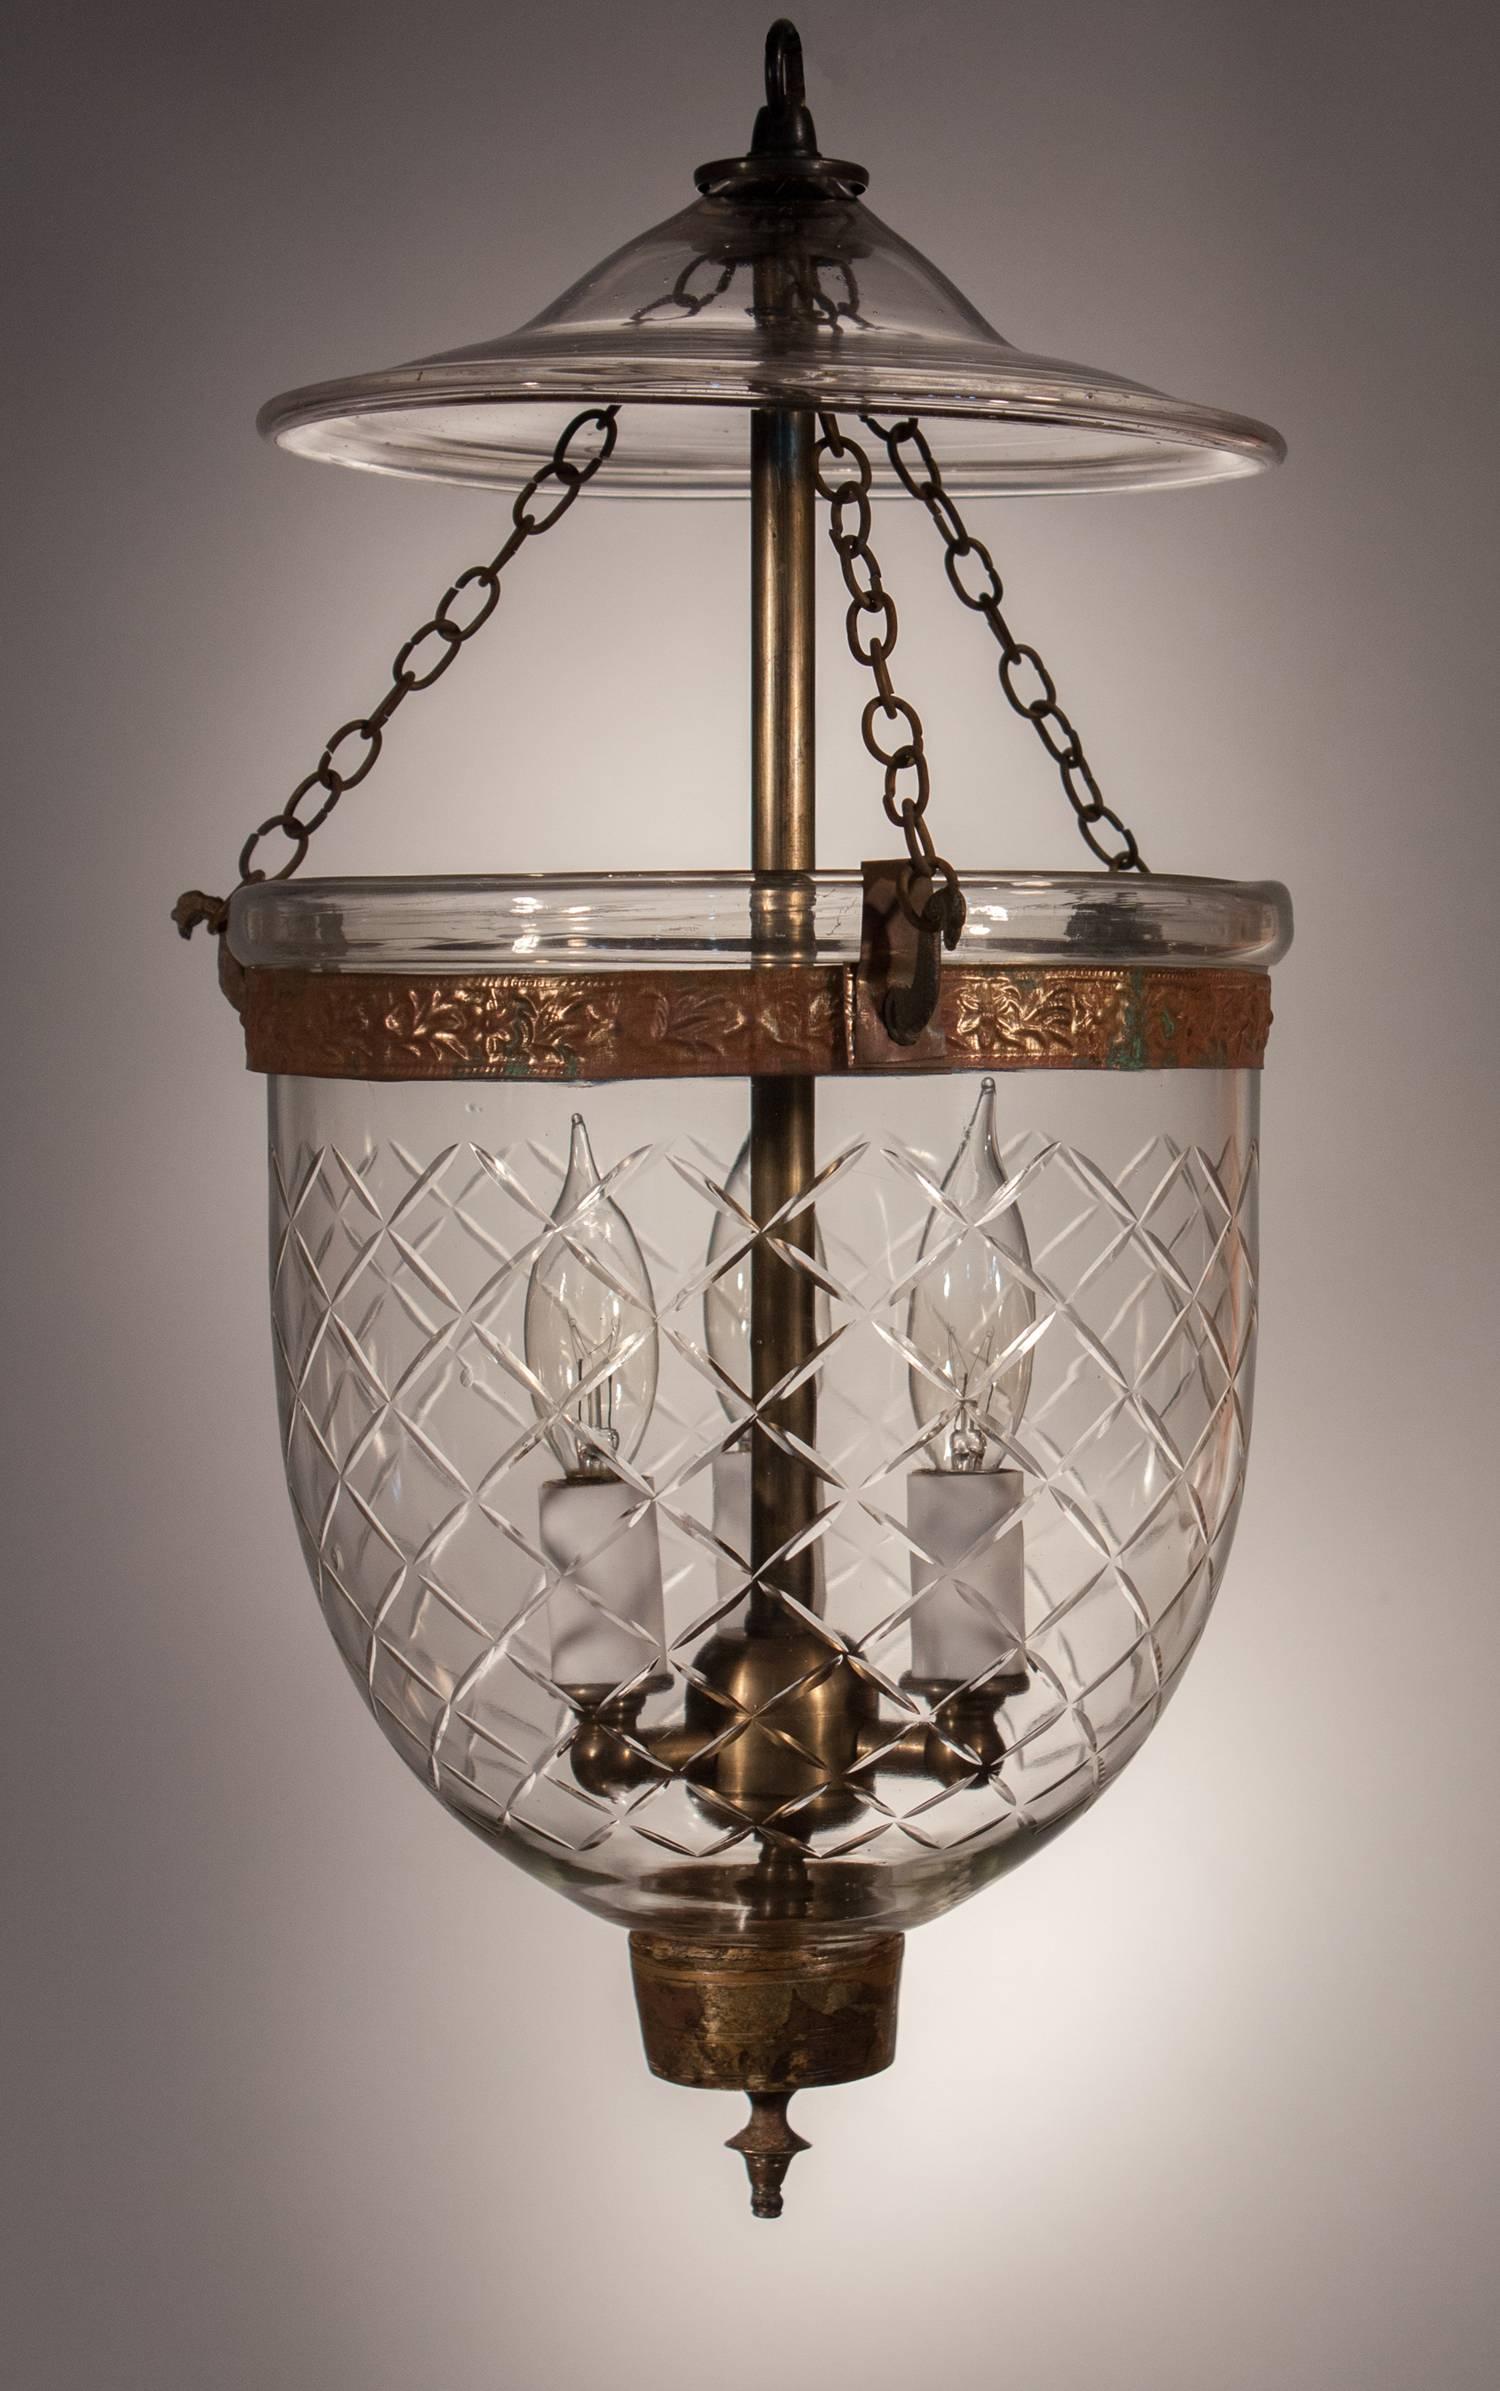 Charming handblown glass bell jar lantern from England with an etched diamond motif that suits this petite pendant. This circa 1860 hall lantern has its authentic brass fittings, including embossed band and candle holder finial. The light has been